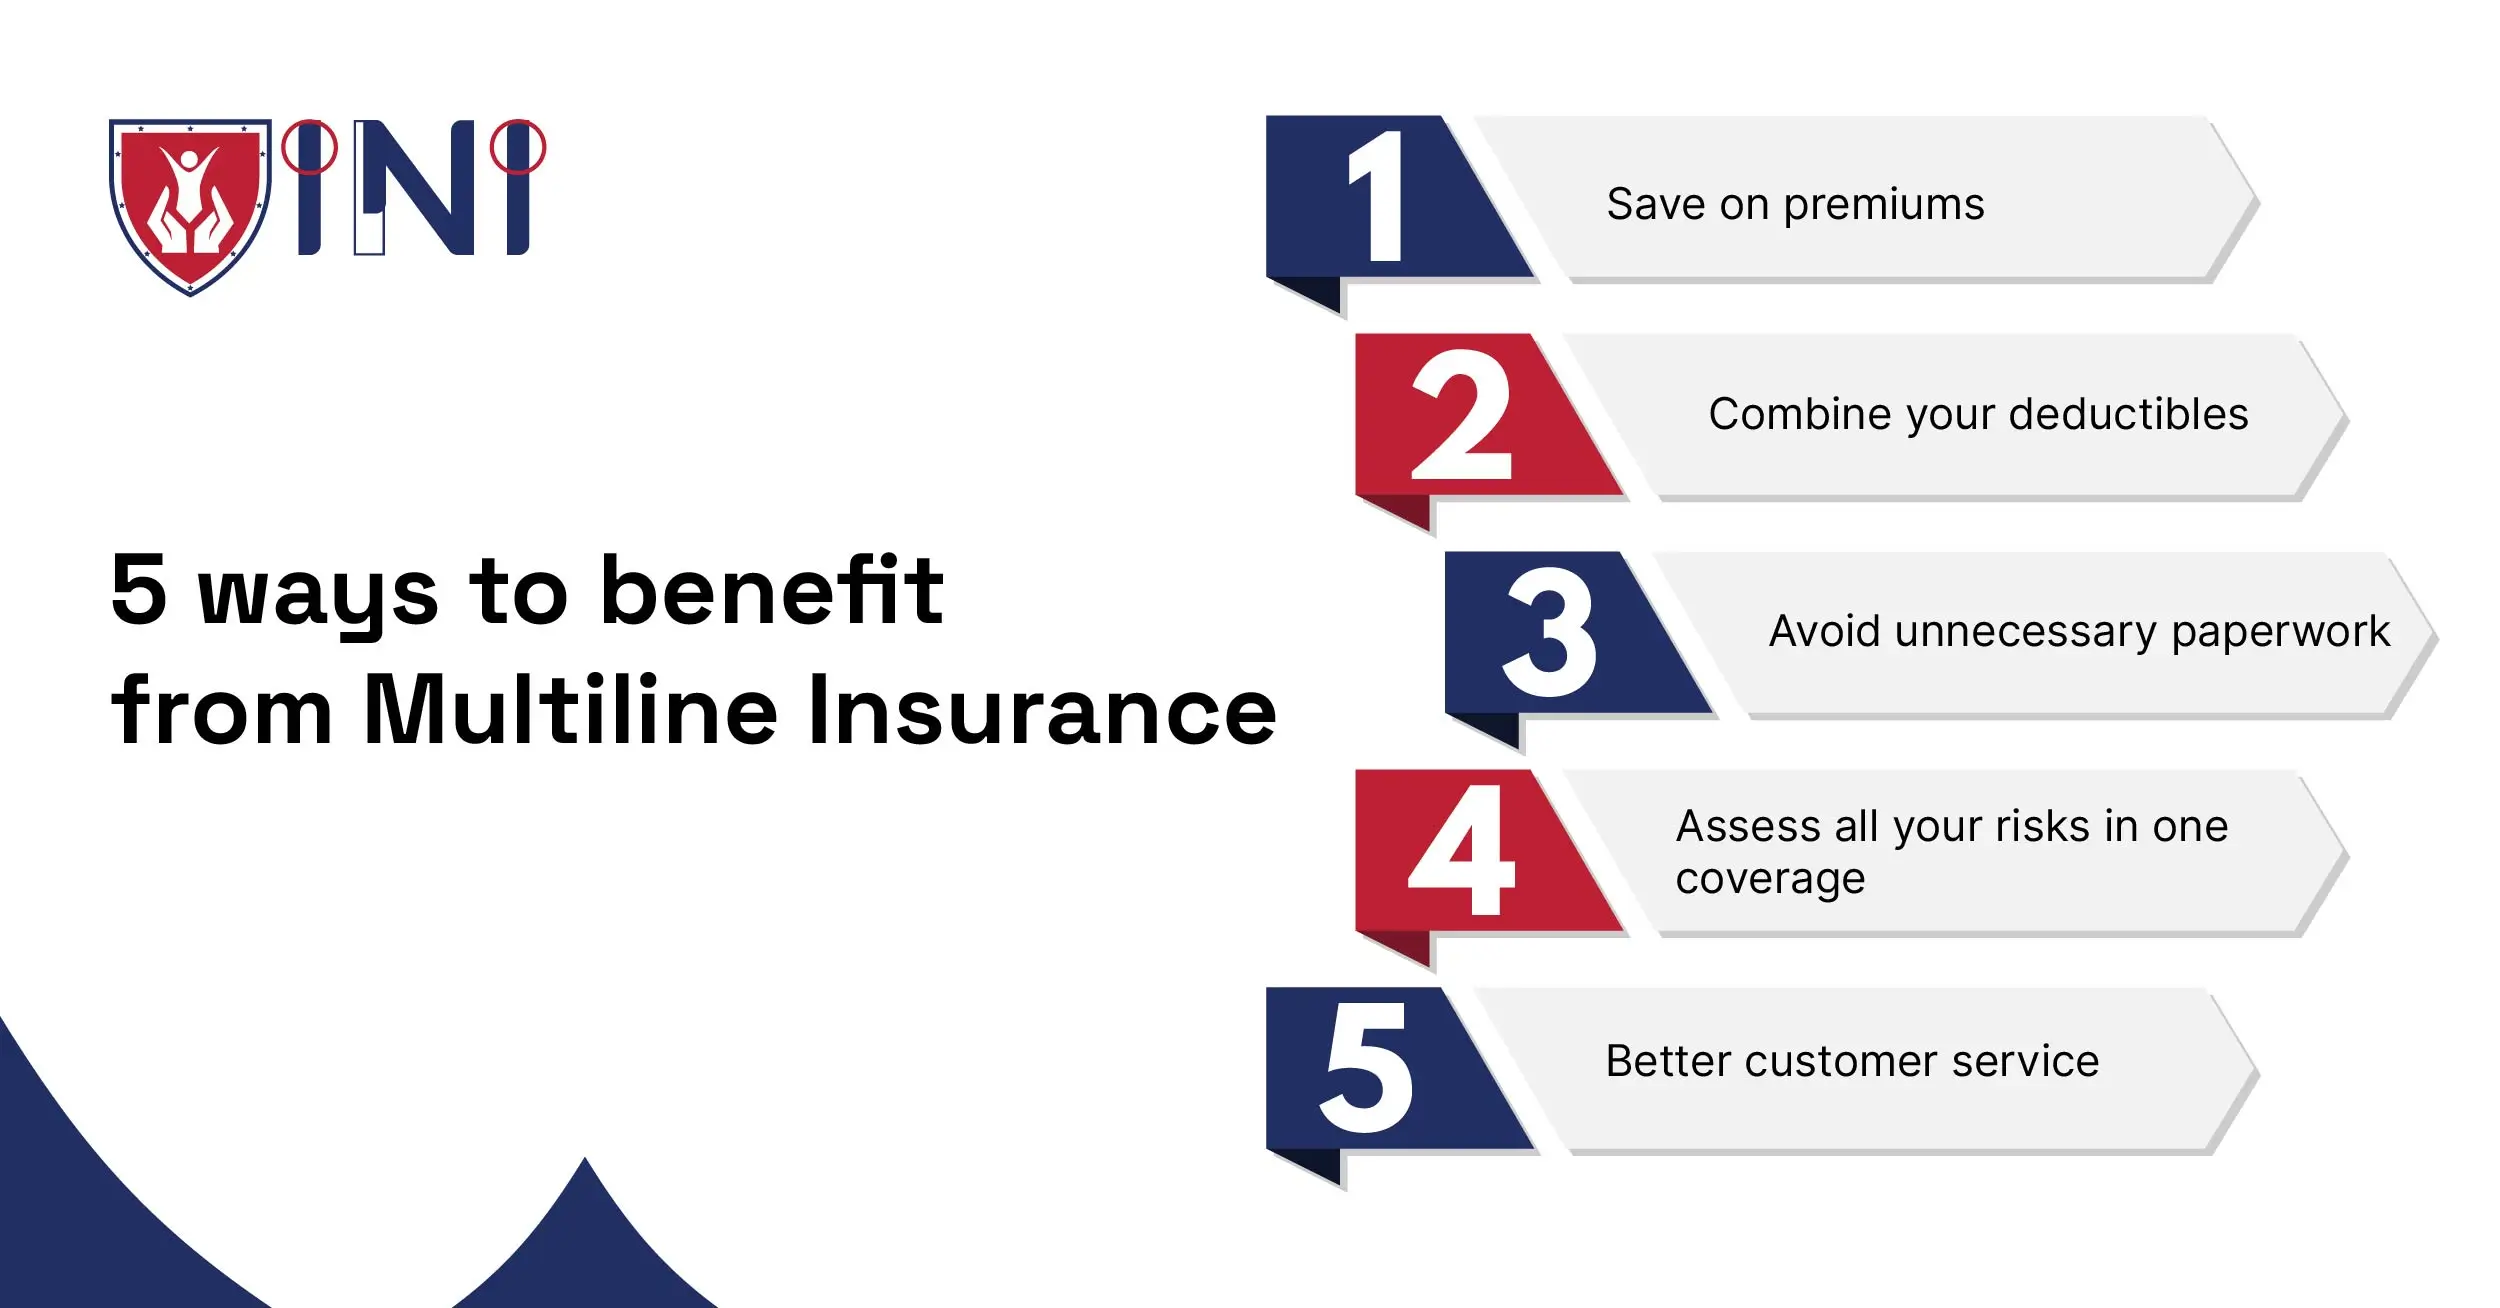 5 ways to benefit from Multiline Insurance